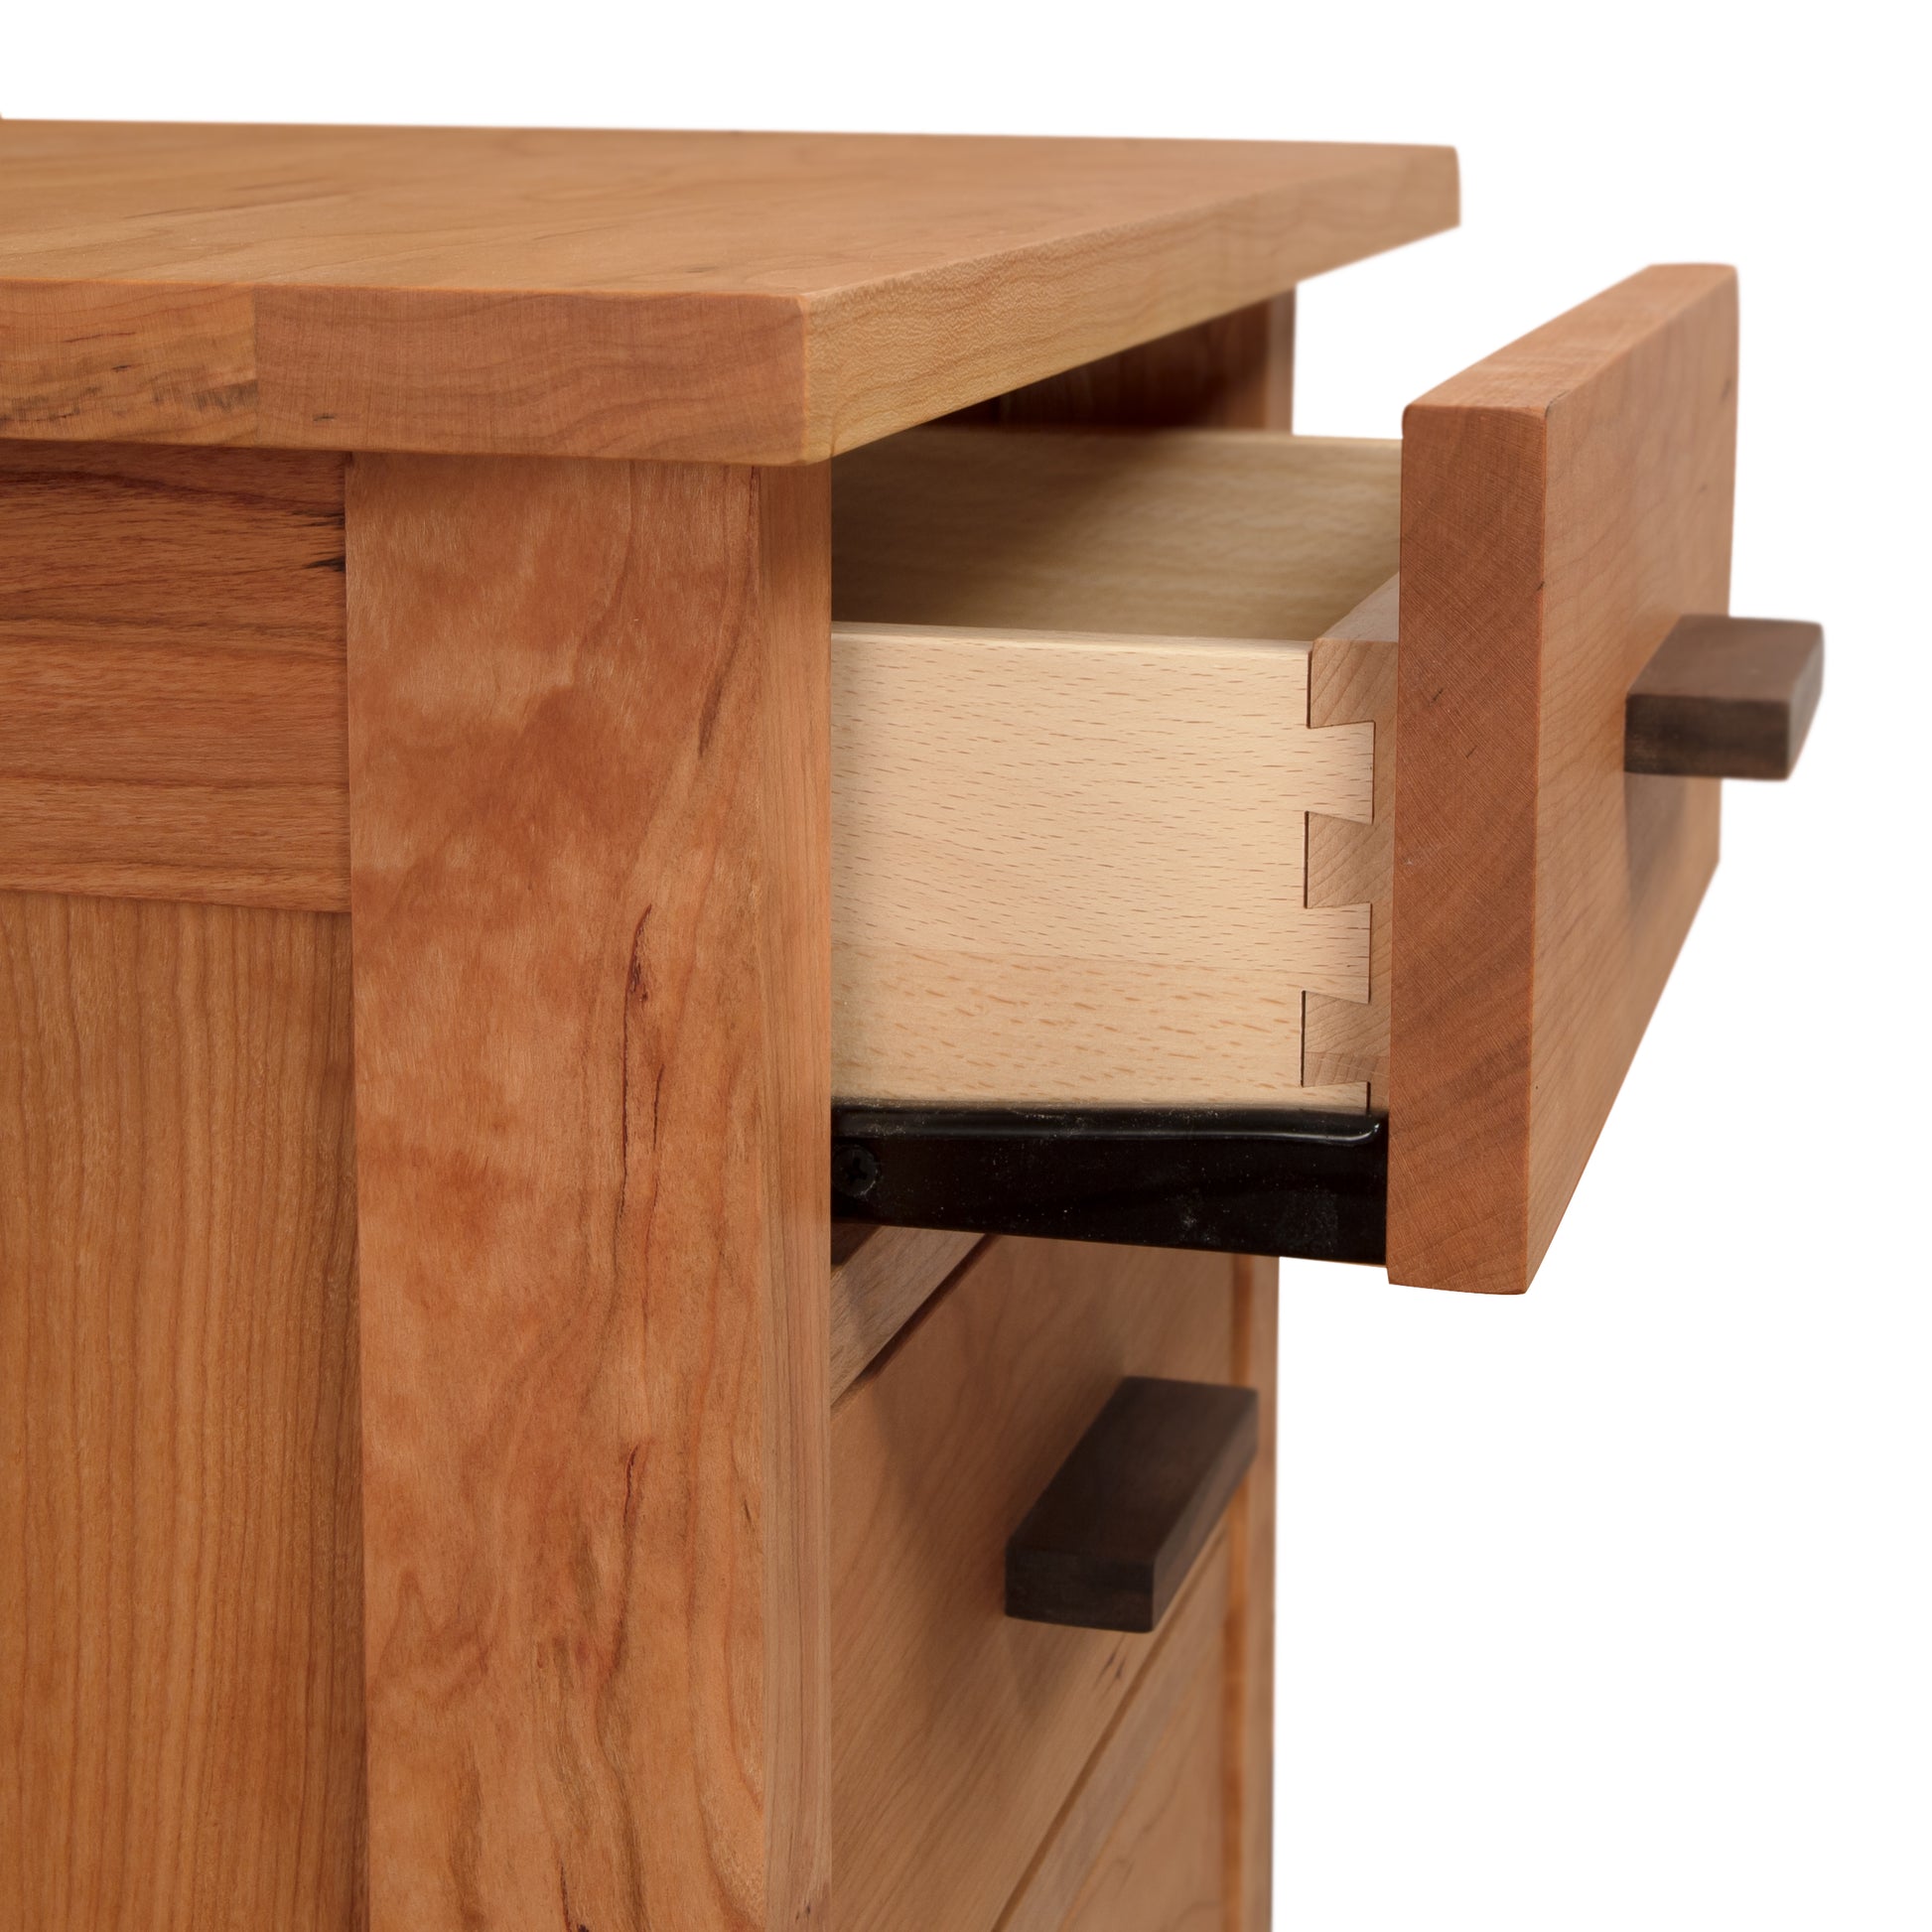 Eco-friendly Modern Craftsman 3-Drawer Nightstand with an open drawer showcasing dovetail joinery by Vermont Furniture Designs.